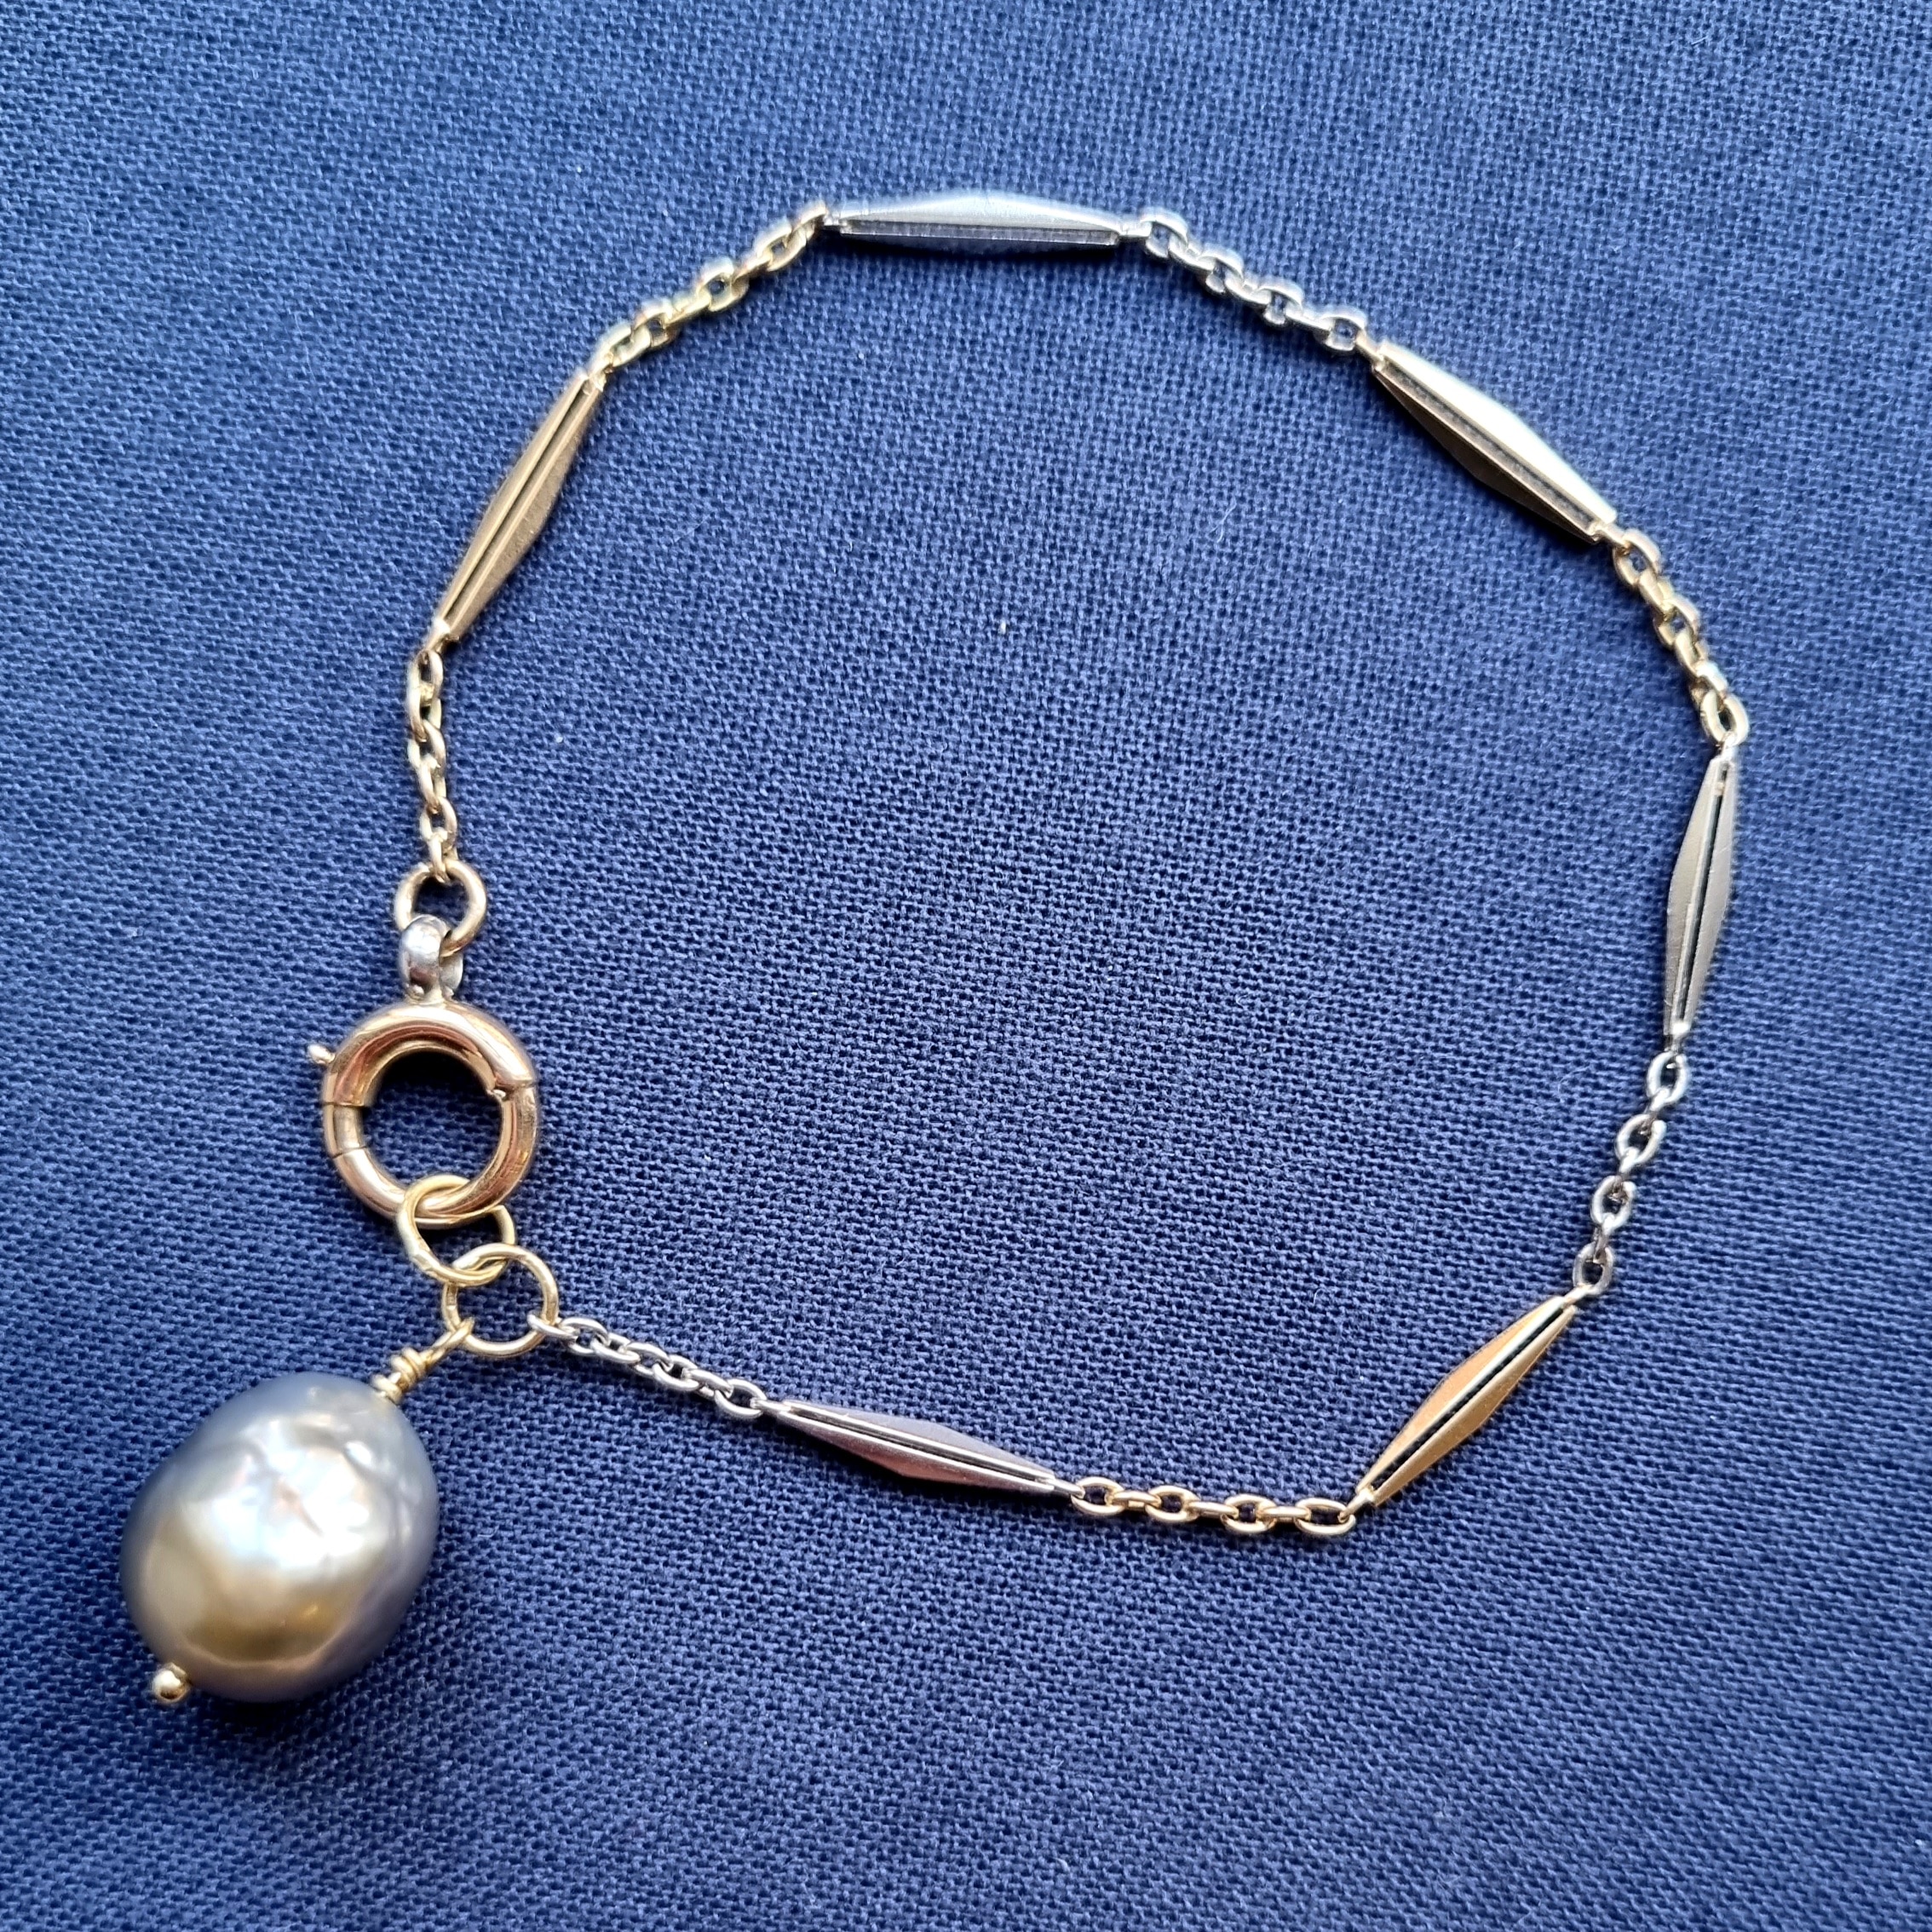 A Platinum & 18ct Yellow Gold Bracelet with Tahitian Pearl